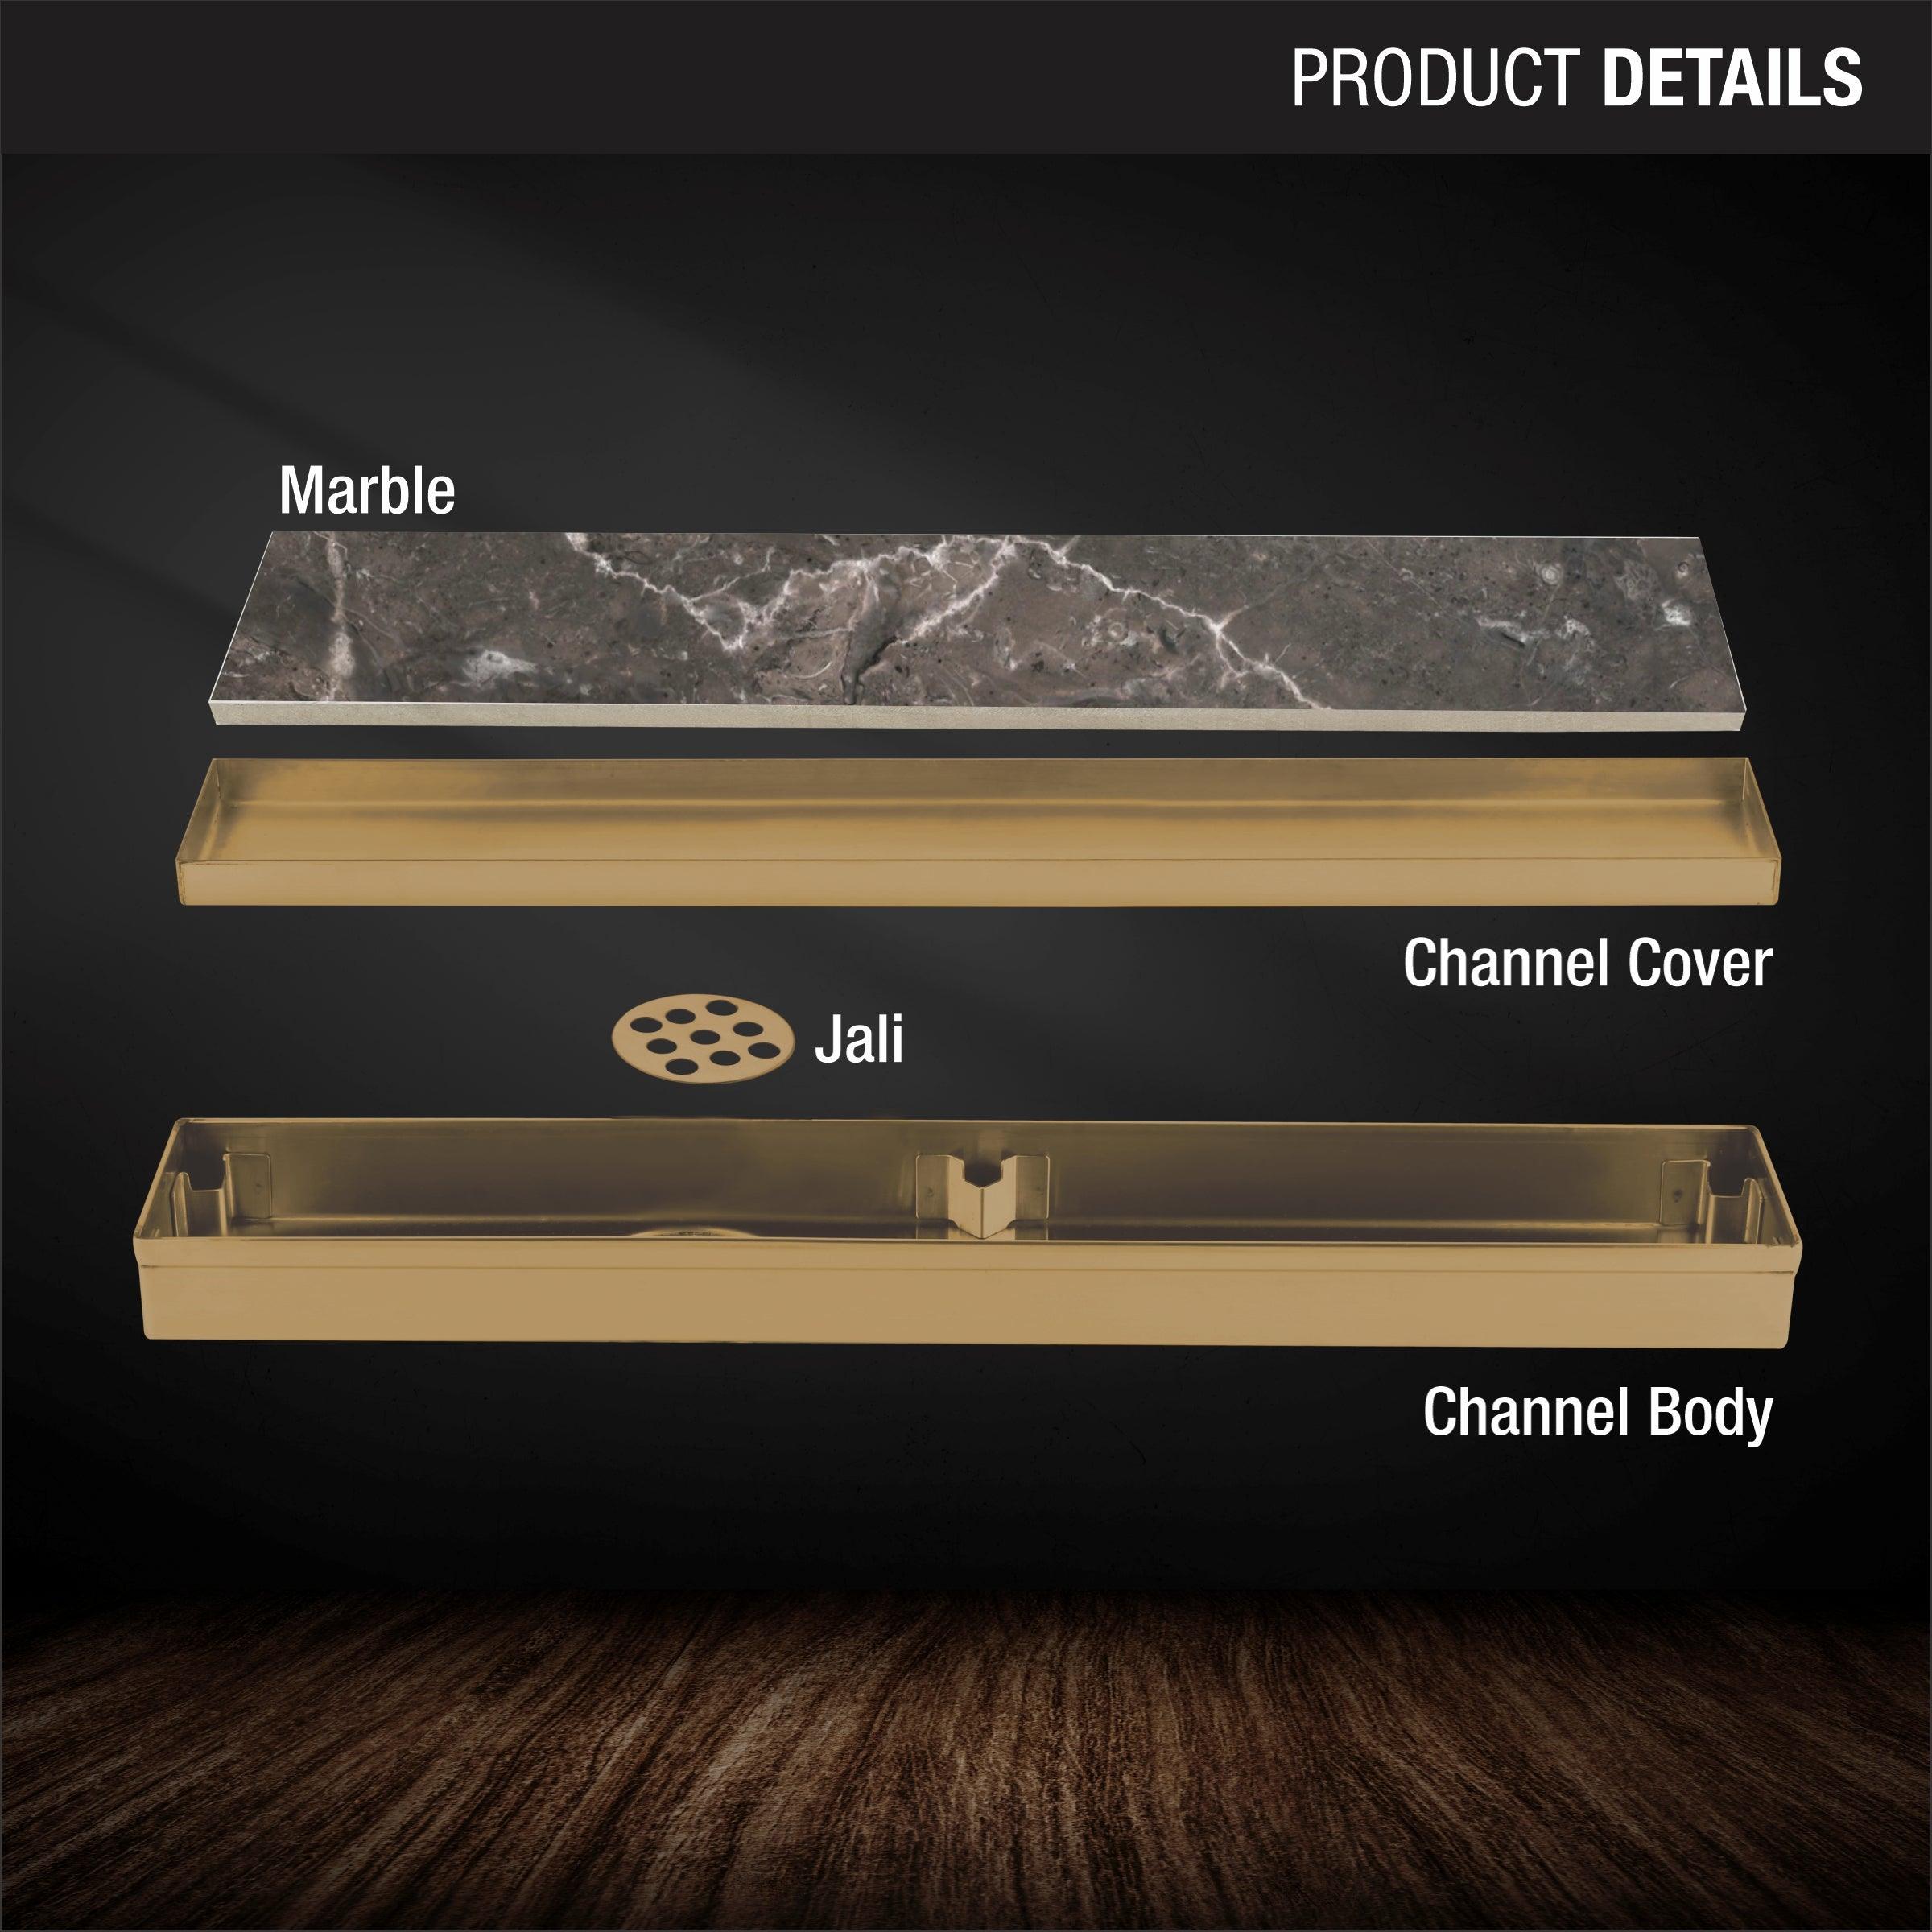 Marble Insert Shower Drain Channel - Yellow Gold (18 x 2 Inches) product details